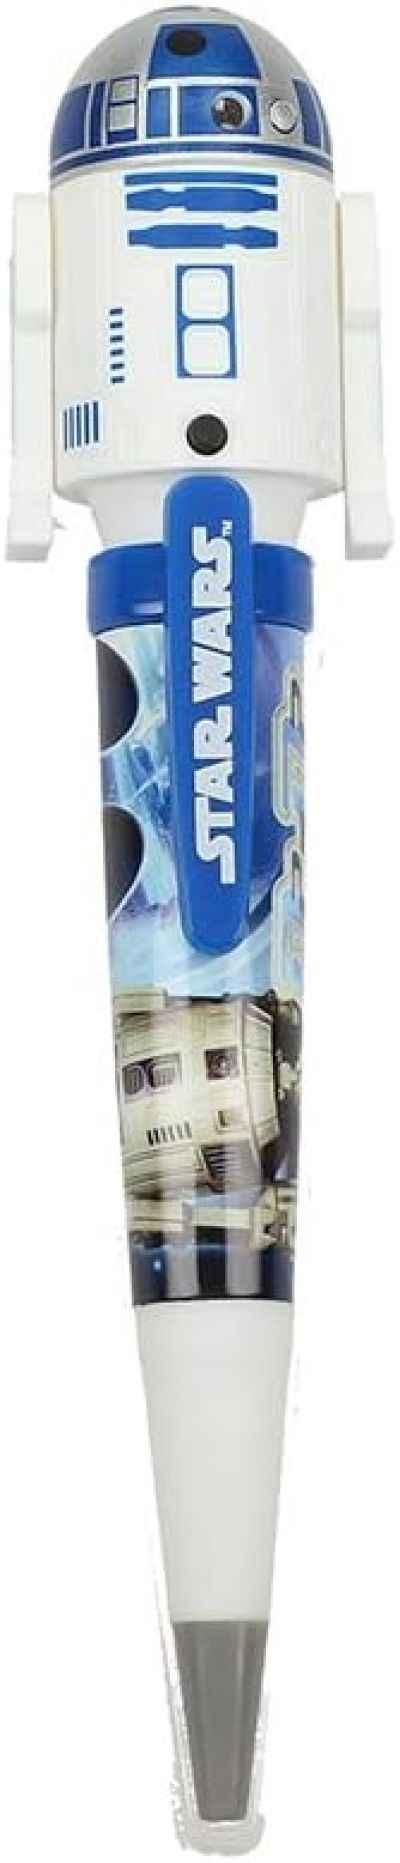 Sd Toys Merchandising Pen with Light Sound and Movement Star Wars RD-D2